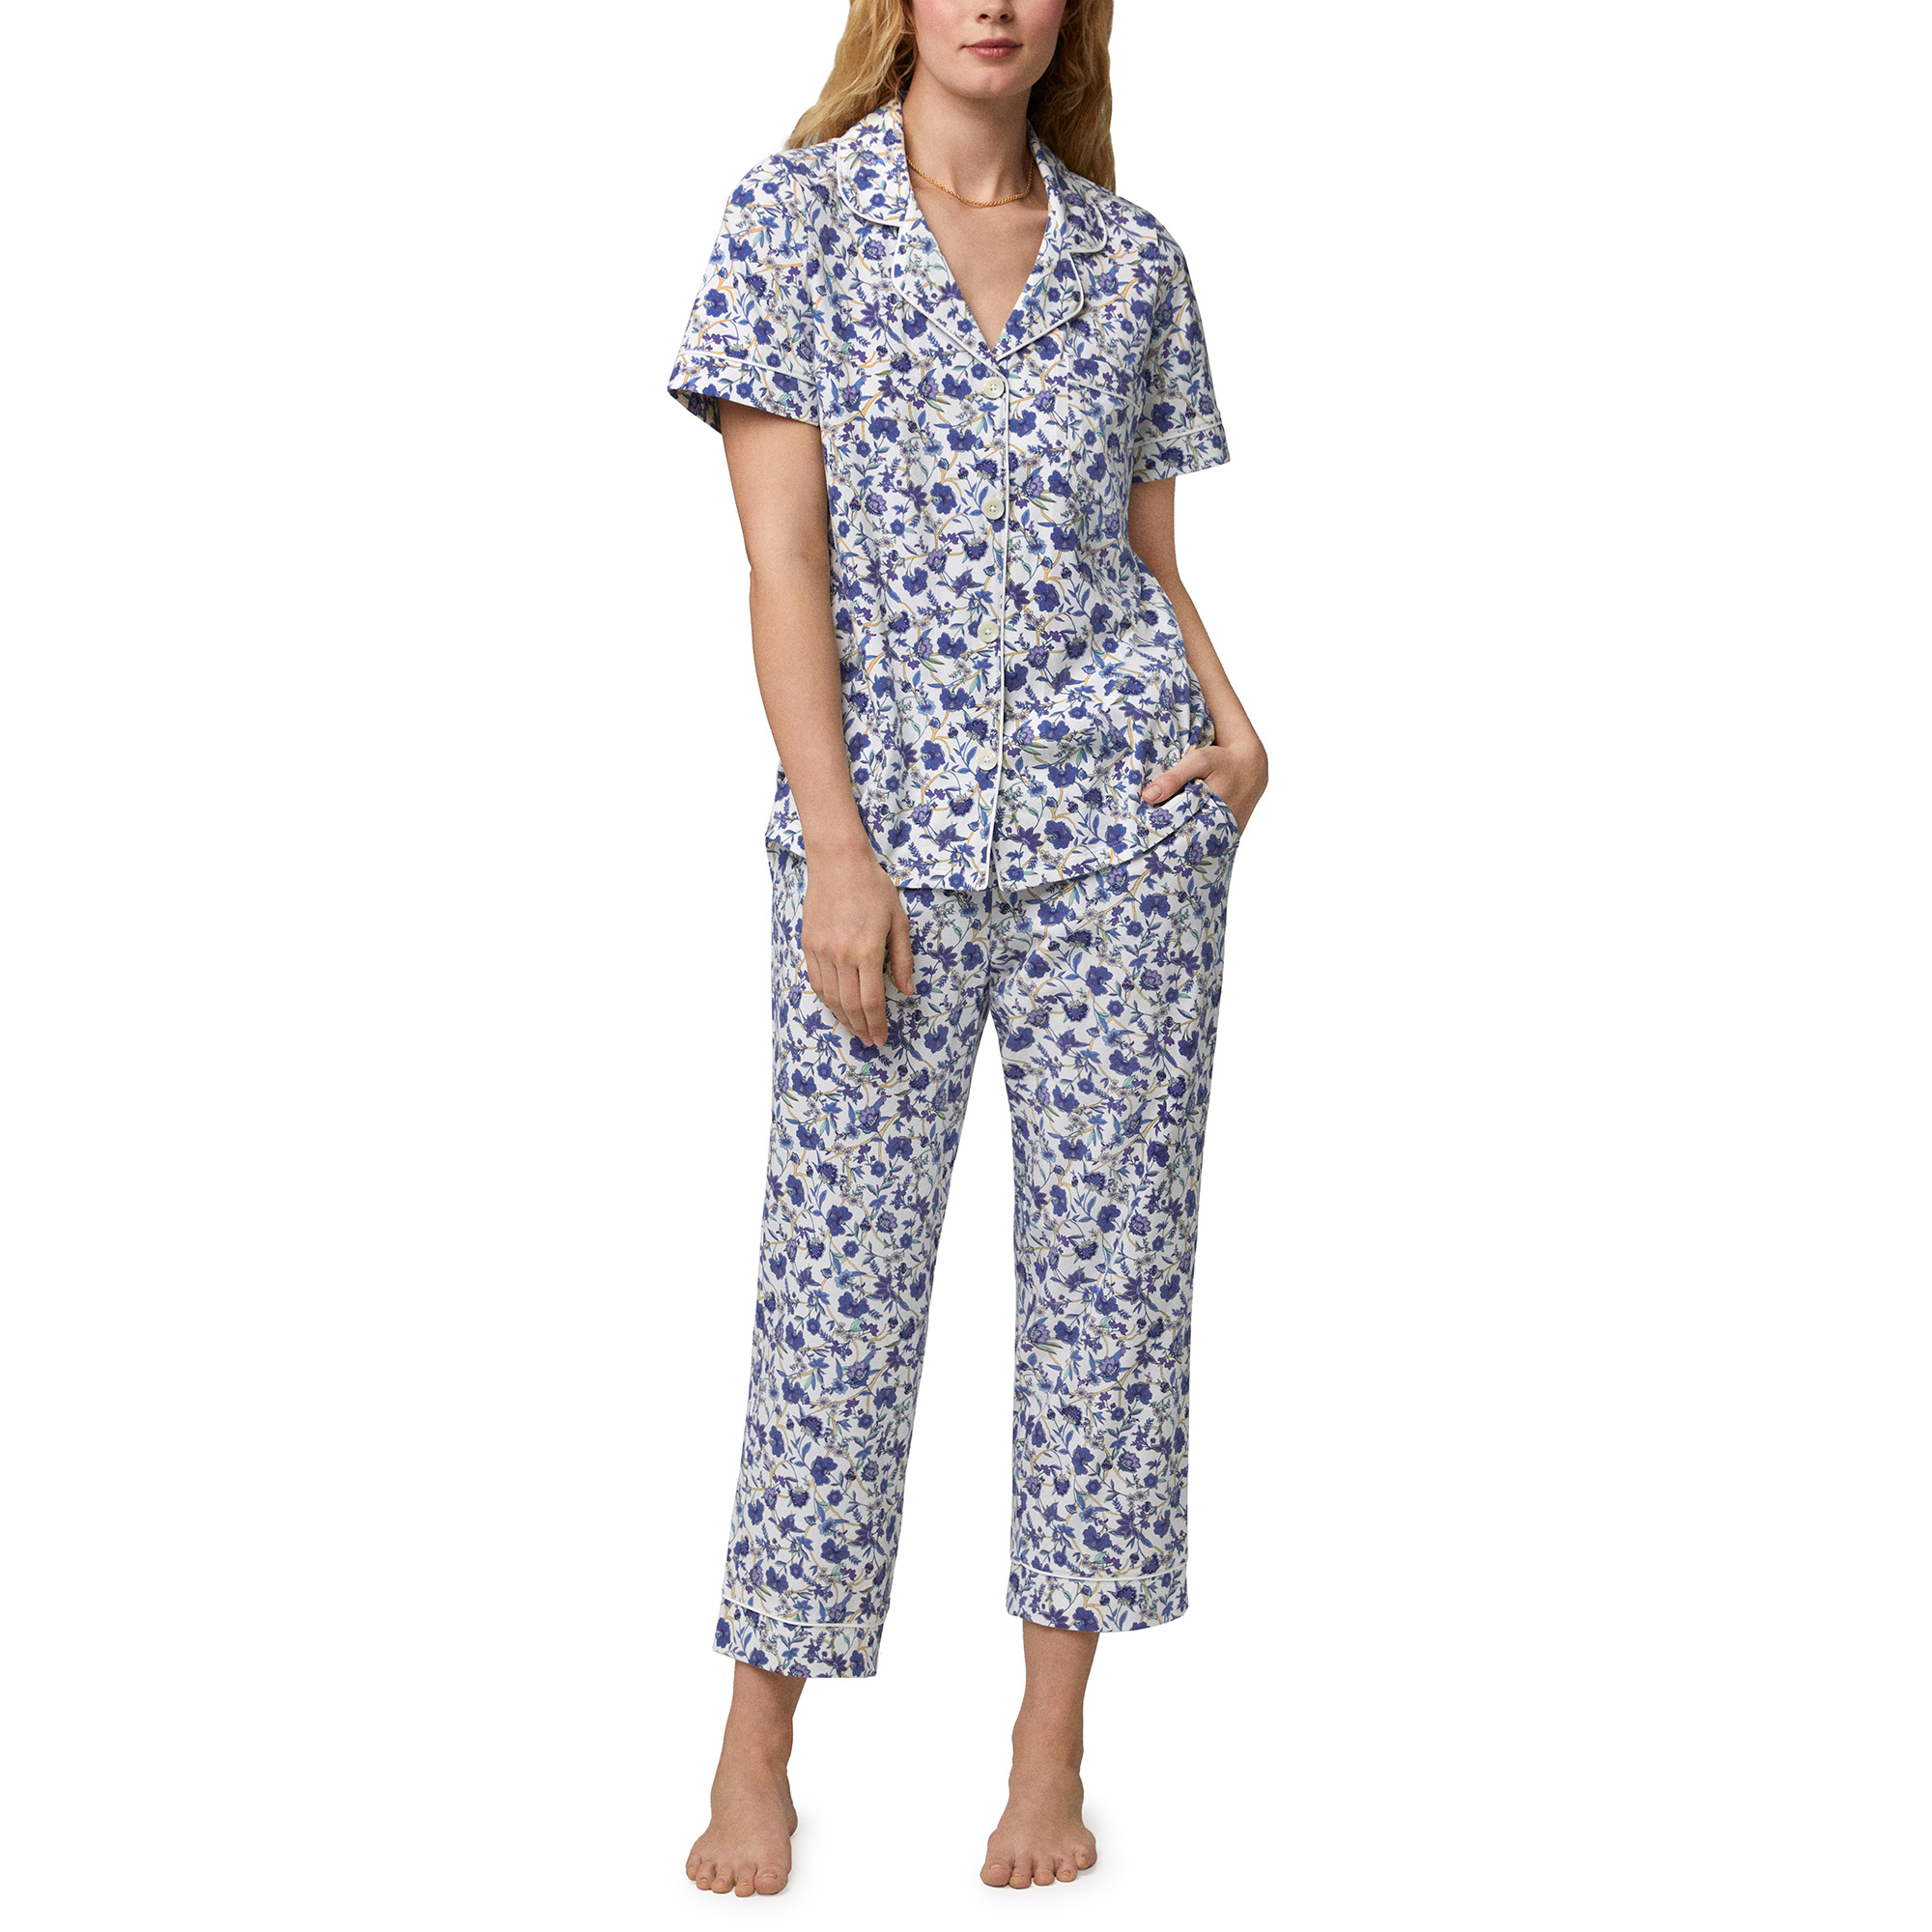 Bed Head BH2727101 Classic Stretch Jersey Cropped PJ Set-Terrance Flrl -  Allure Intimate Apparel